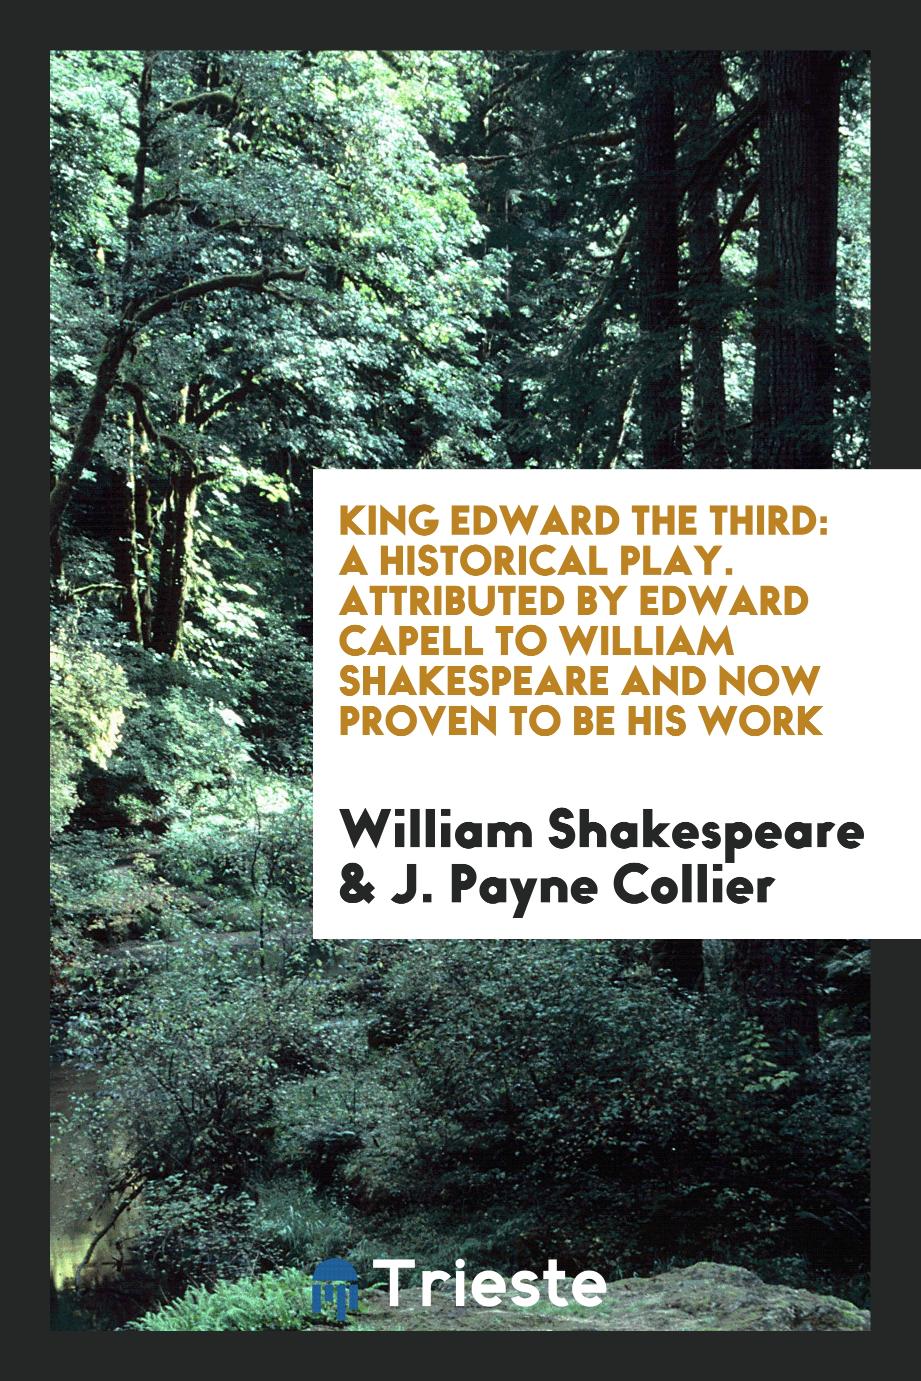 King Edward the Third: A Historical Play. Attributed by Edward Capell to William Shakespeare and Now Proven to Be His Work